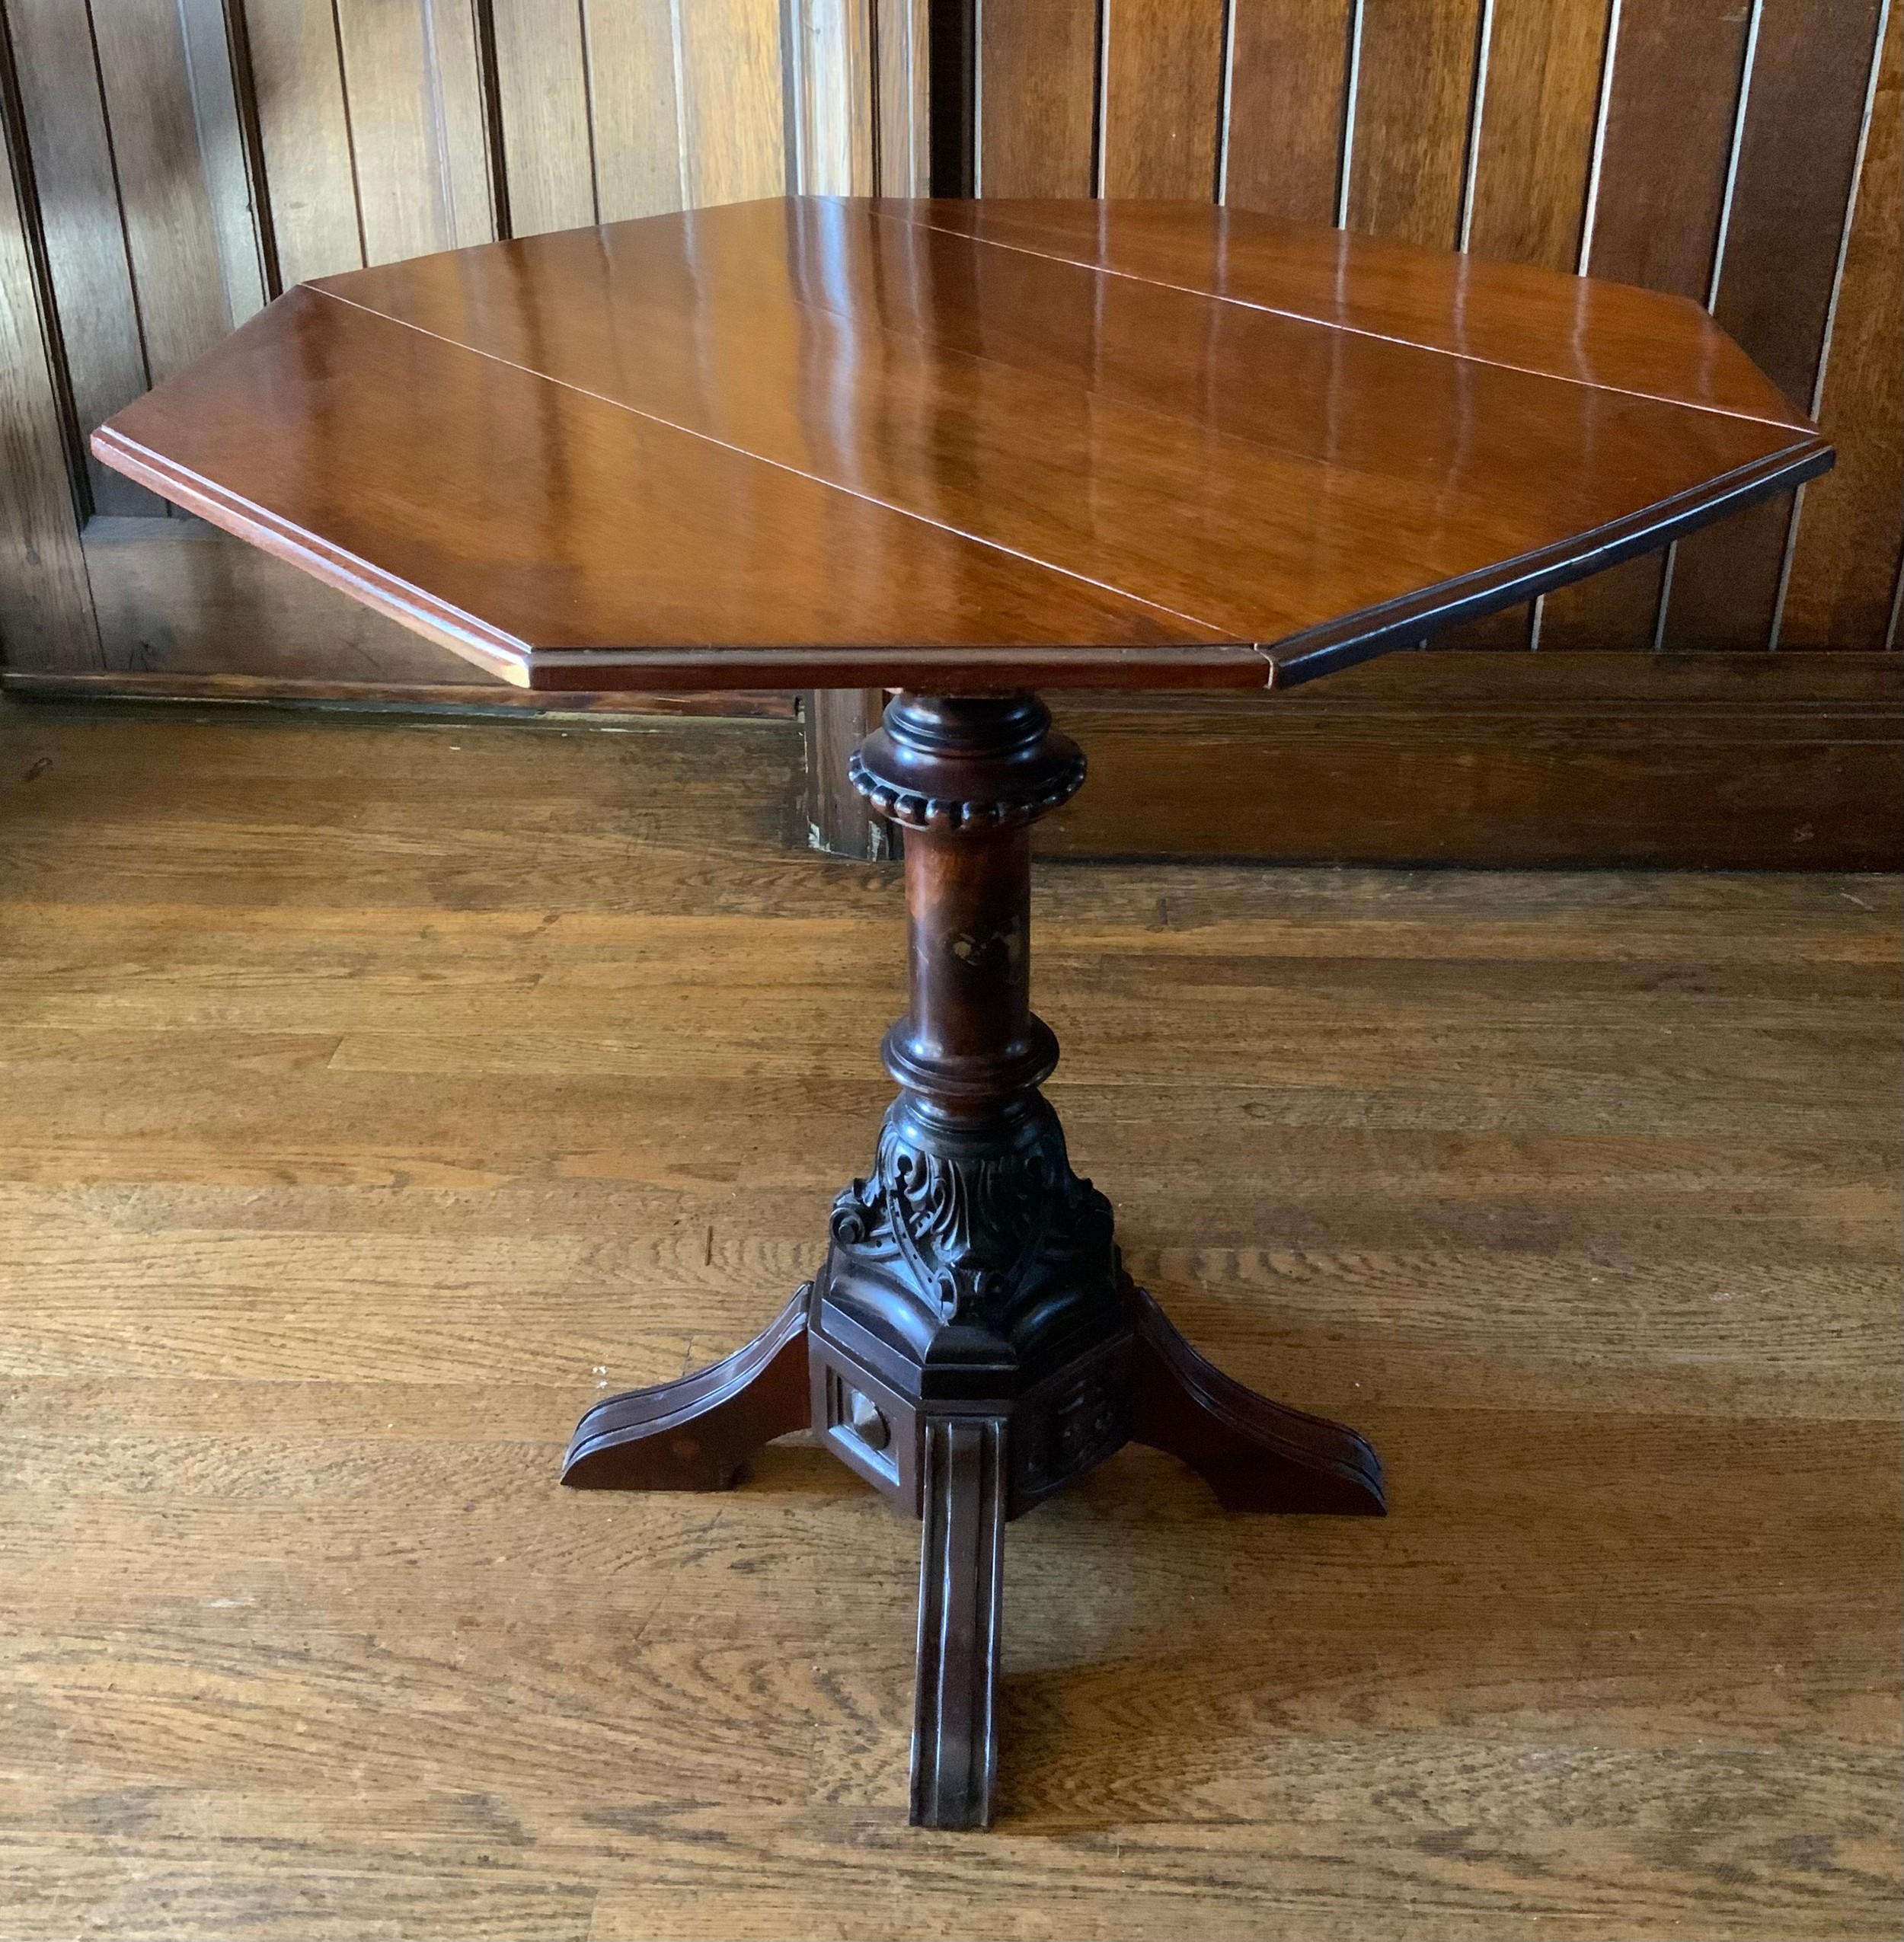 A 'Victorian' mahogany octagonal drop leaf occasional table, carved columns, four splay legs, 70cm